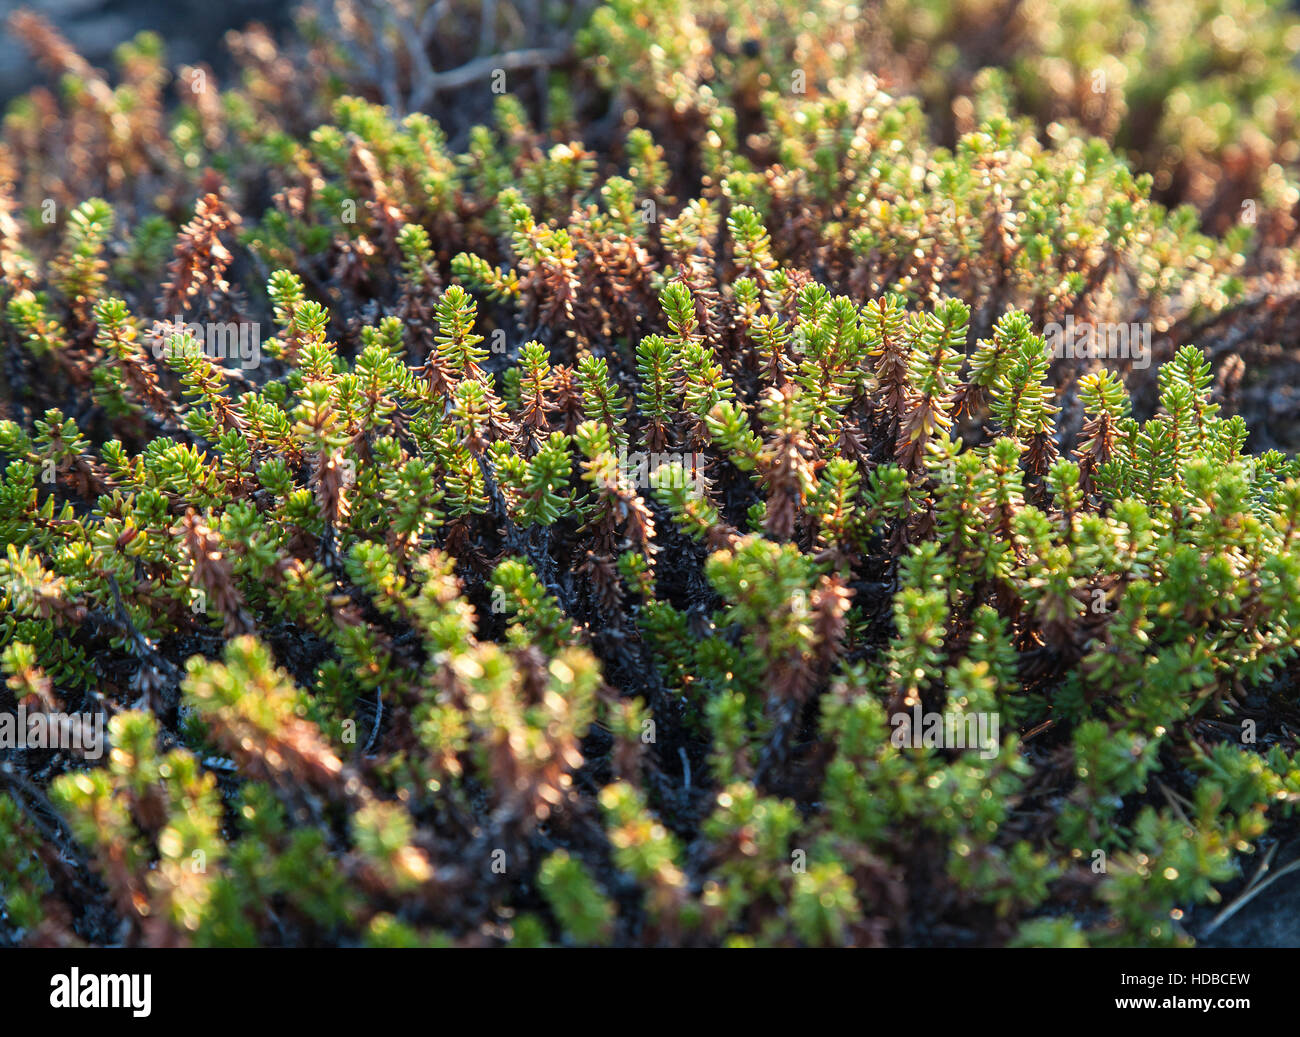 Crowberry plants in the evening sunlight, close-up Stock Photo